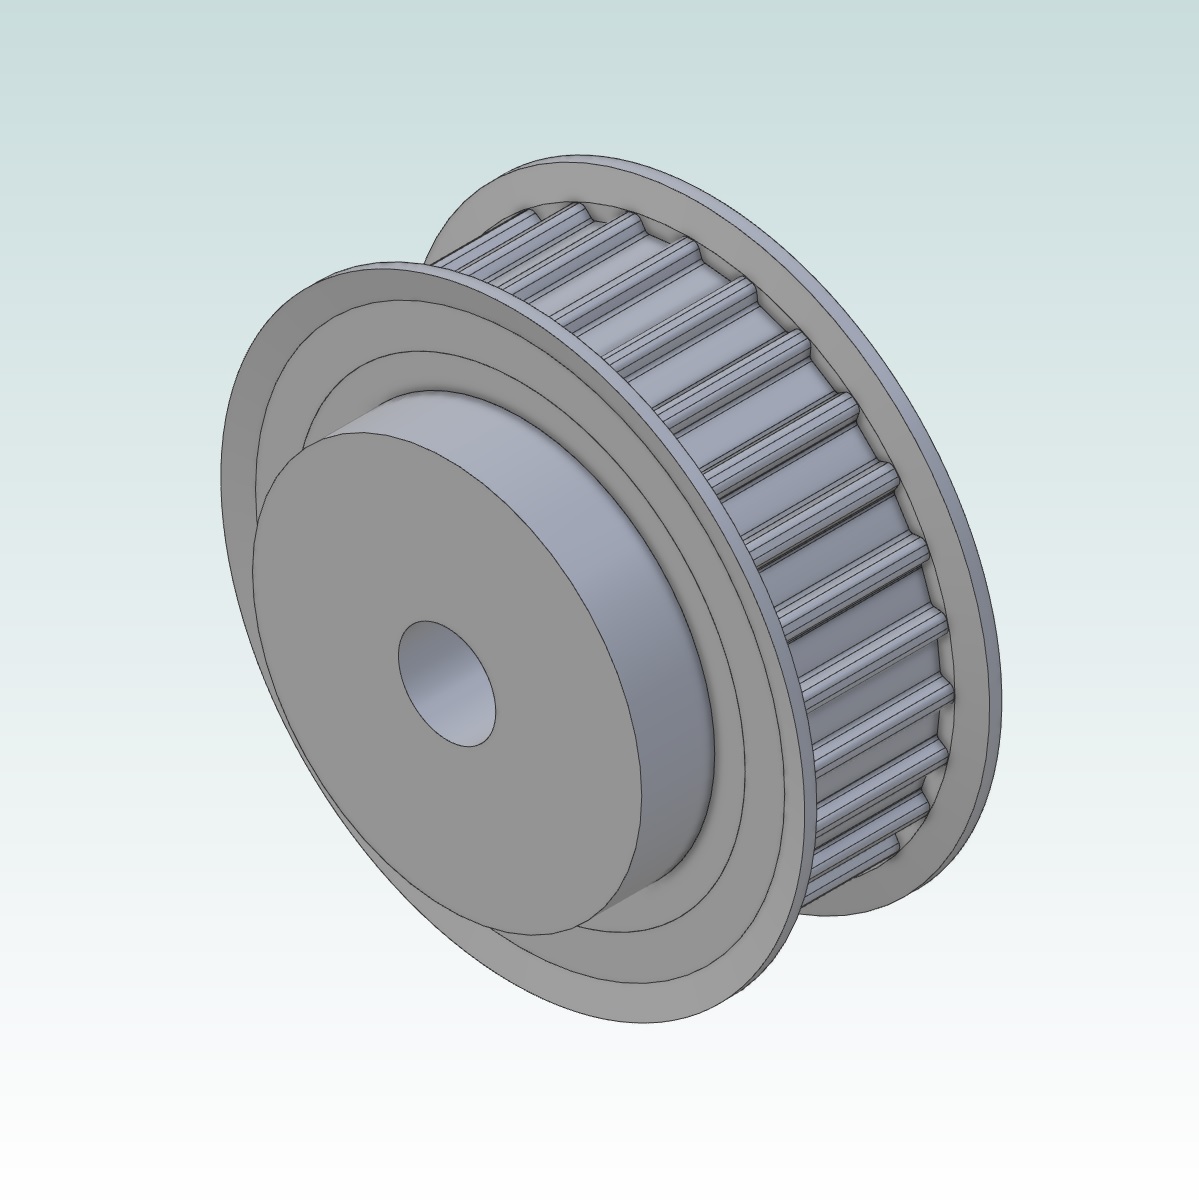 65721 at5 pulley 21at5 z28 for 10mm wide belts 3d render